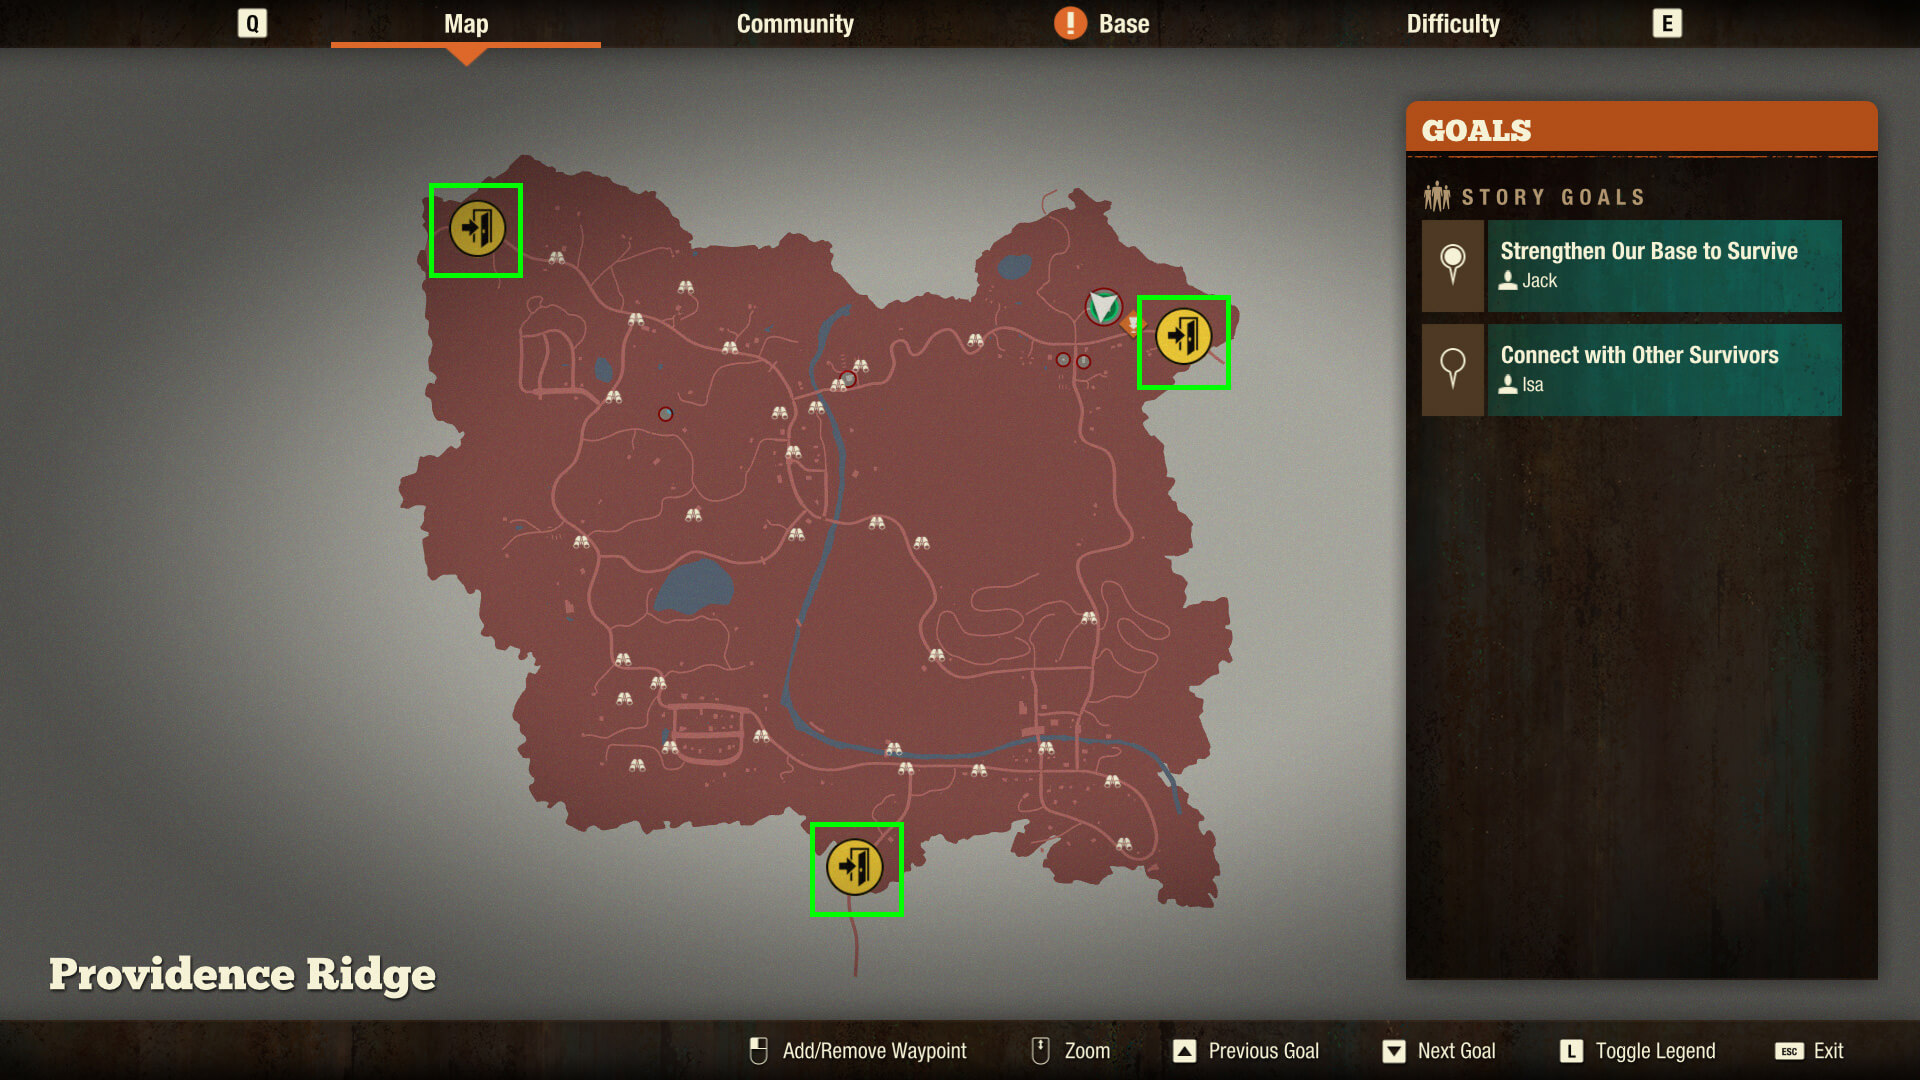 Additional Game Modes & Storylines - State of Decay 2